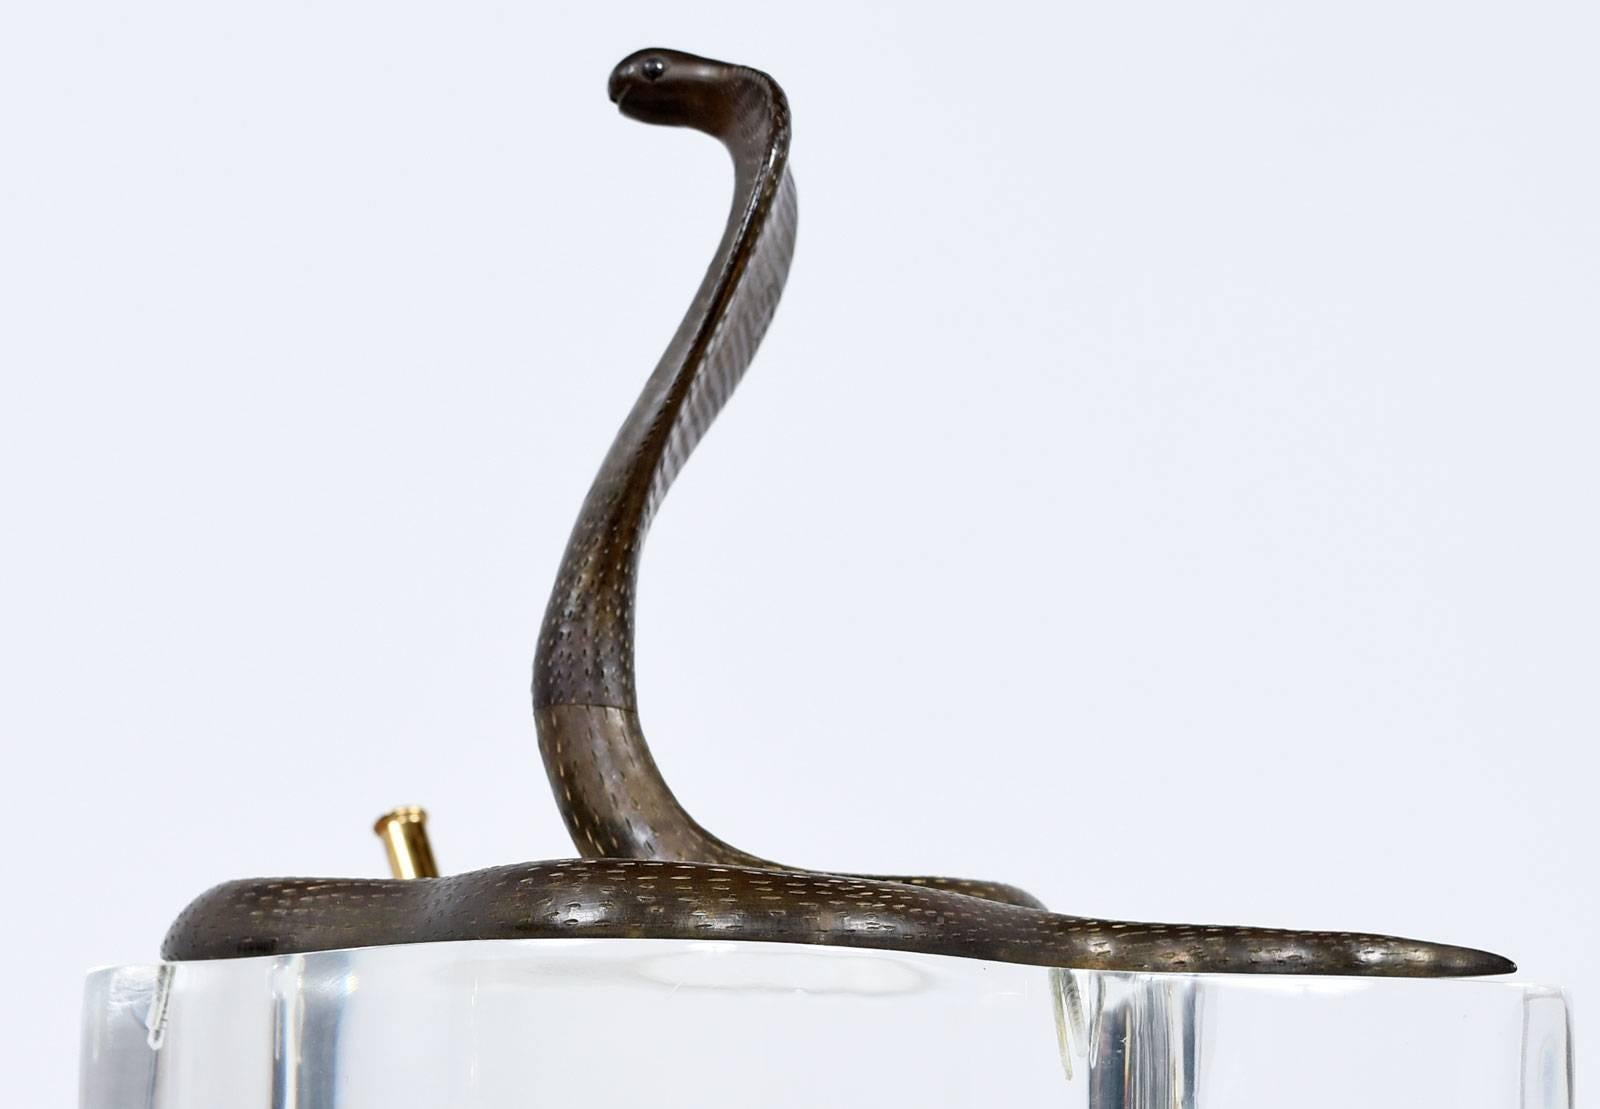 Vintage Lucite and brass double pen holder from the 1970s. This unique sculptural piece features a large brass king cobra sitting atop a thick V-shaped Lucite base with a brass pen holder on each end. It's signed by the artist on the back.